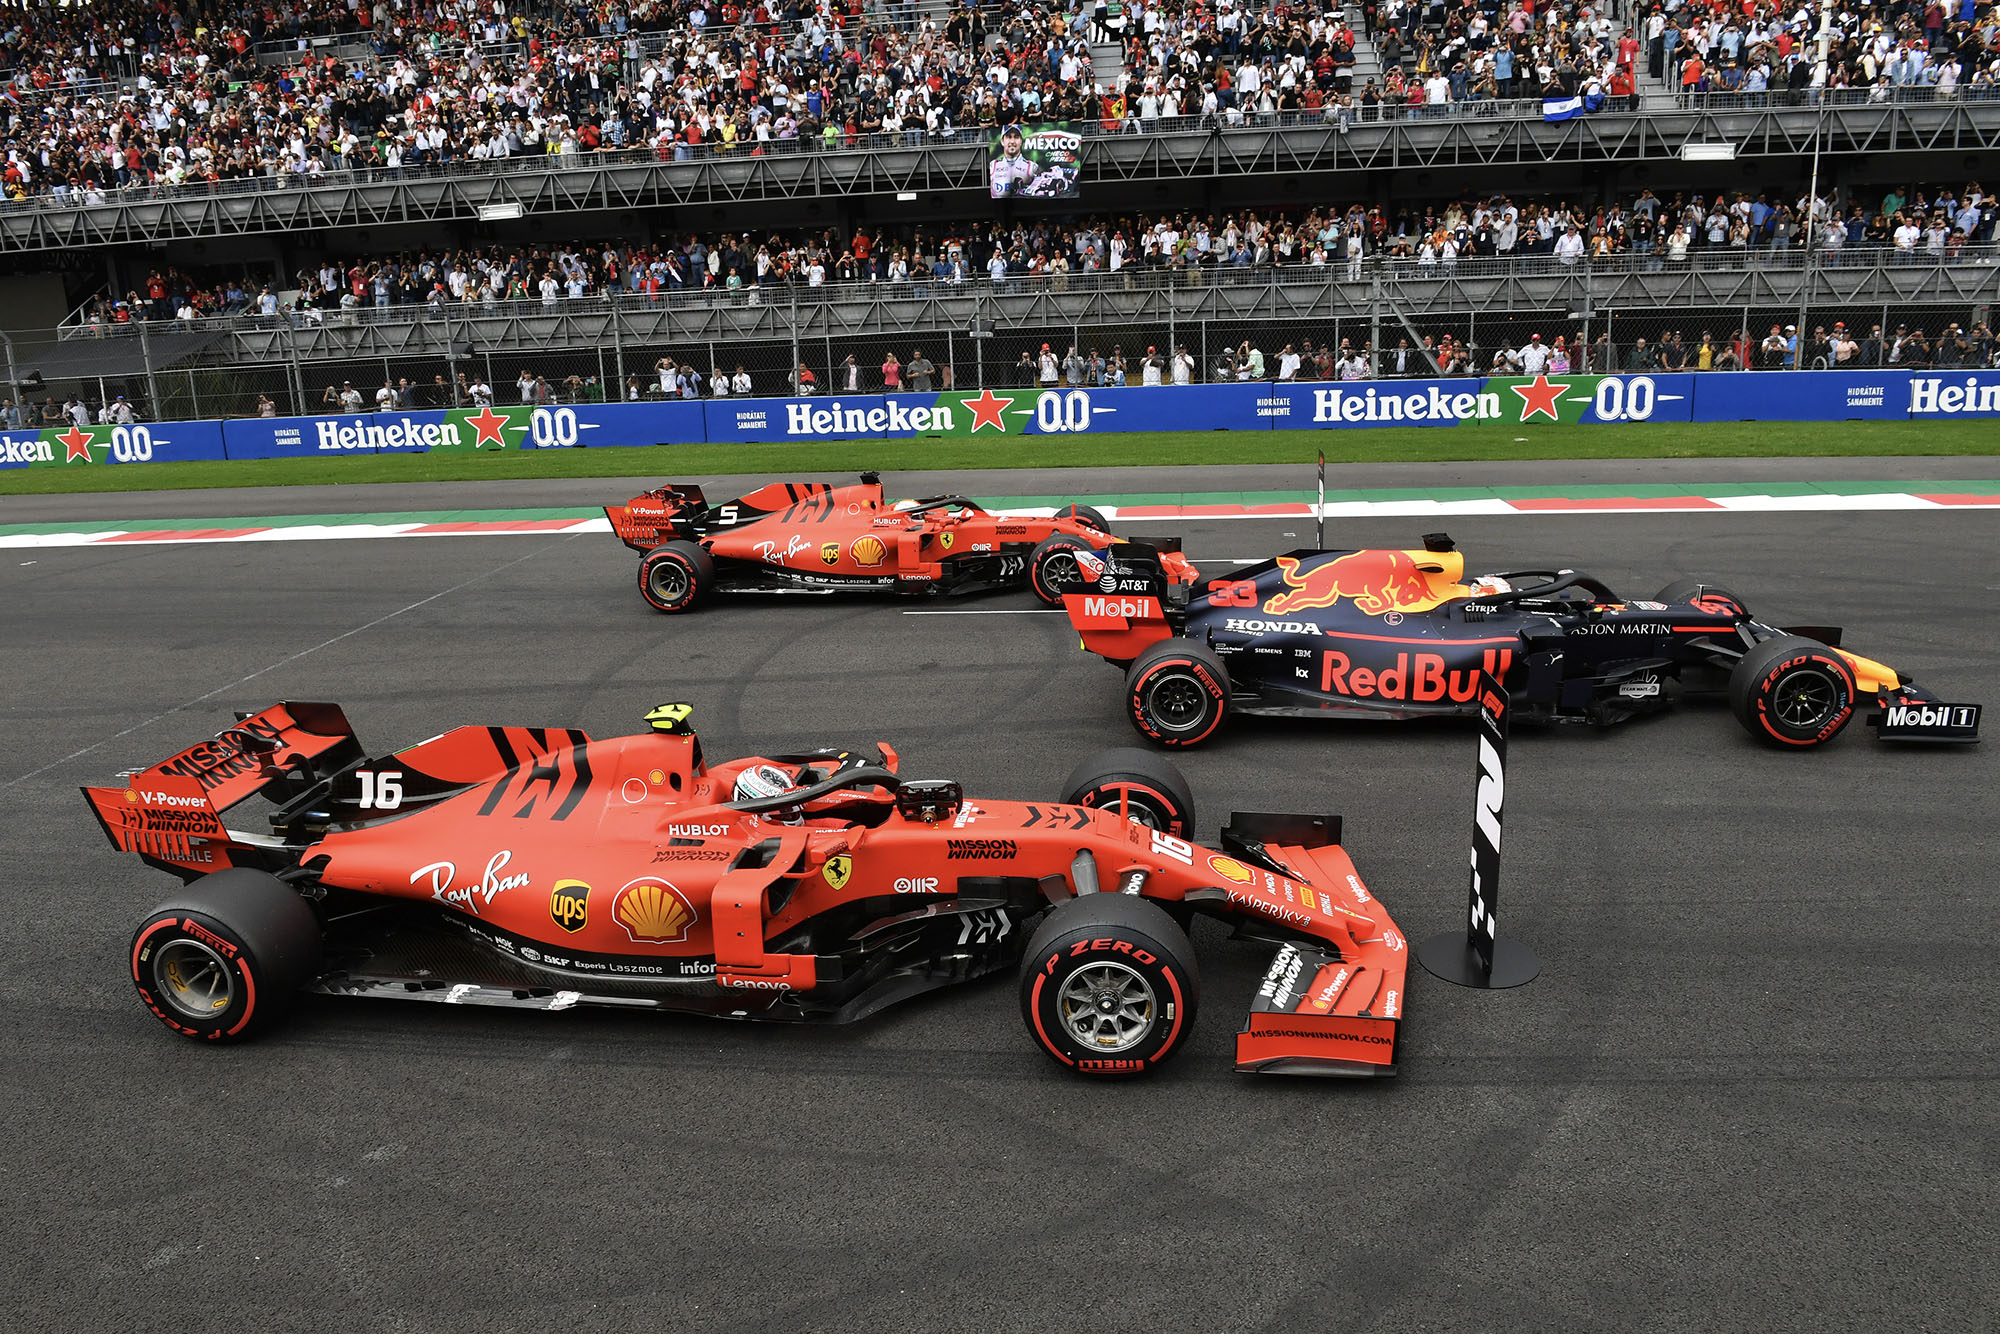 Max Verstappen parked in the pole-sitters position after qualifying for the 2019 F1 Mexican Grand Prix, flanked by two Ferraris